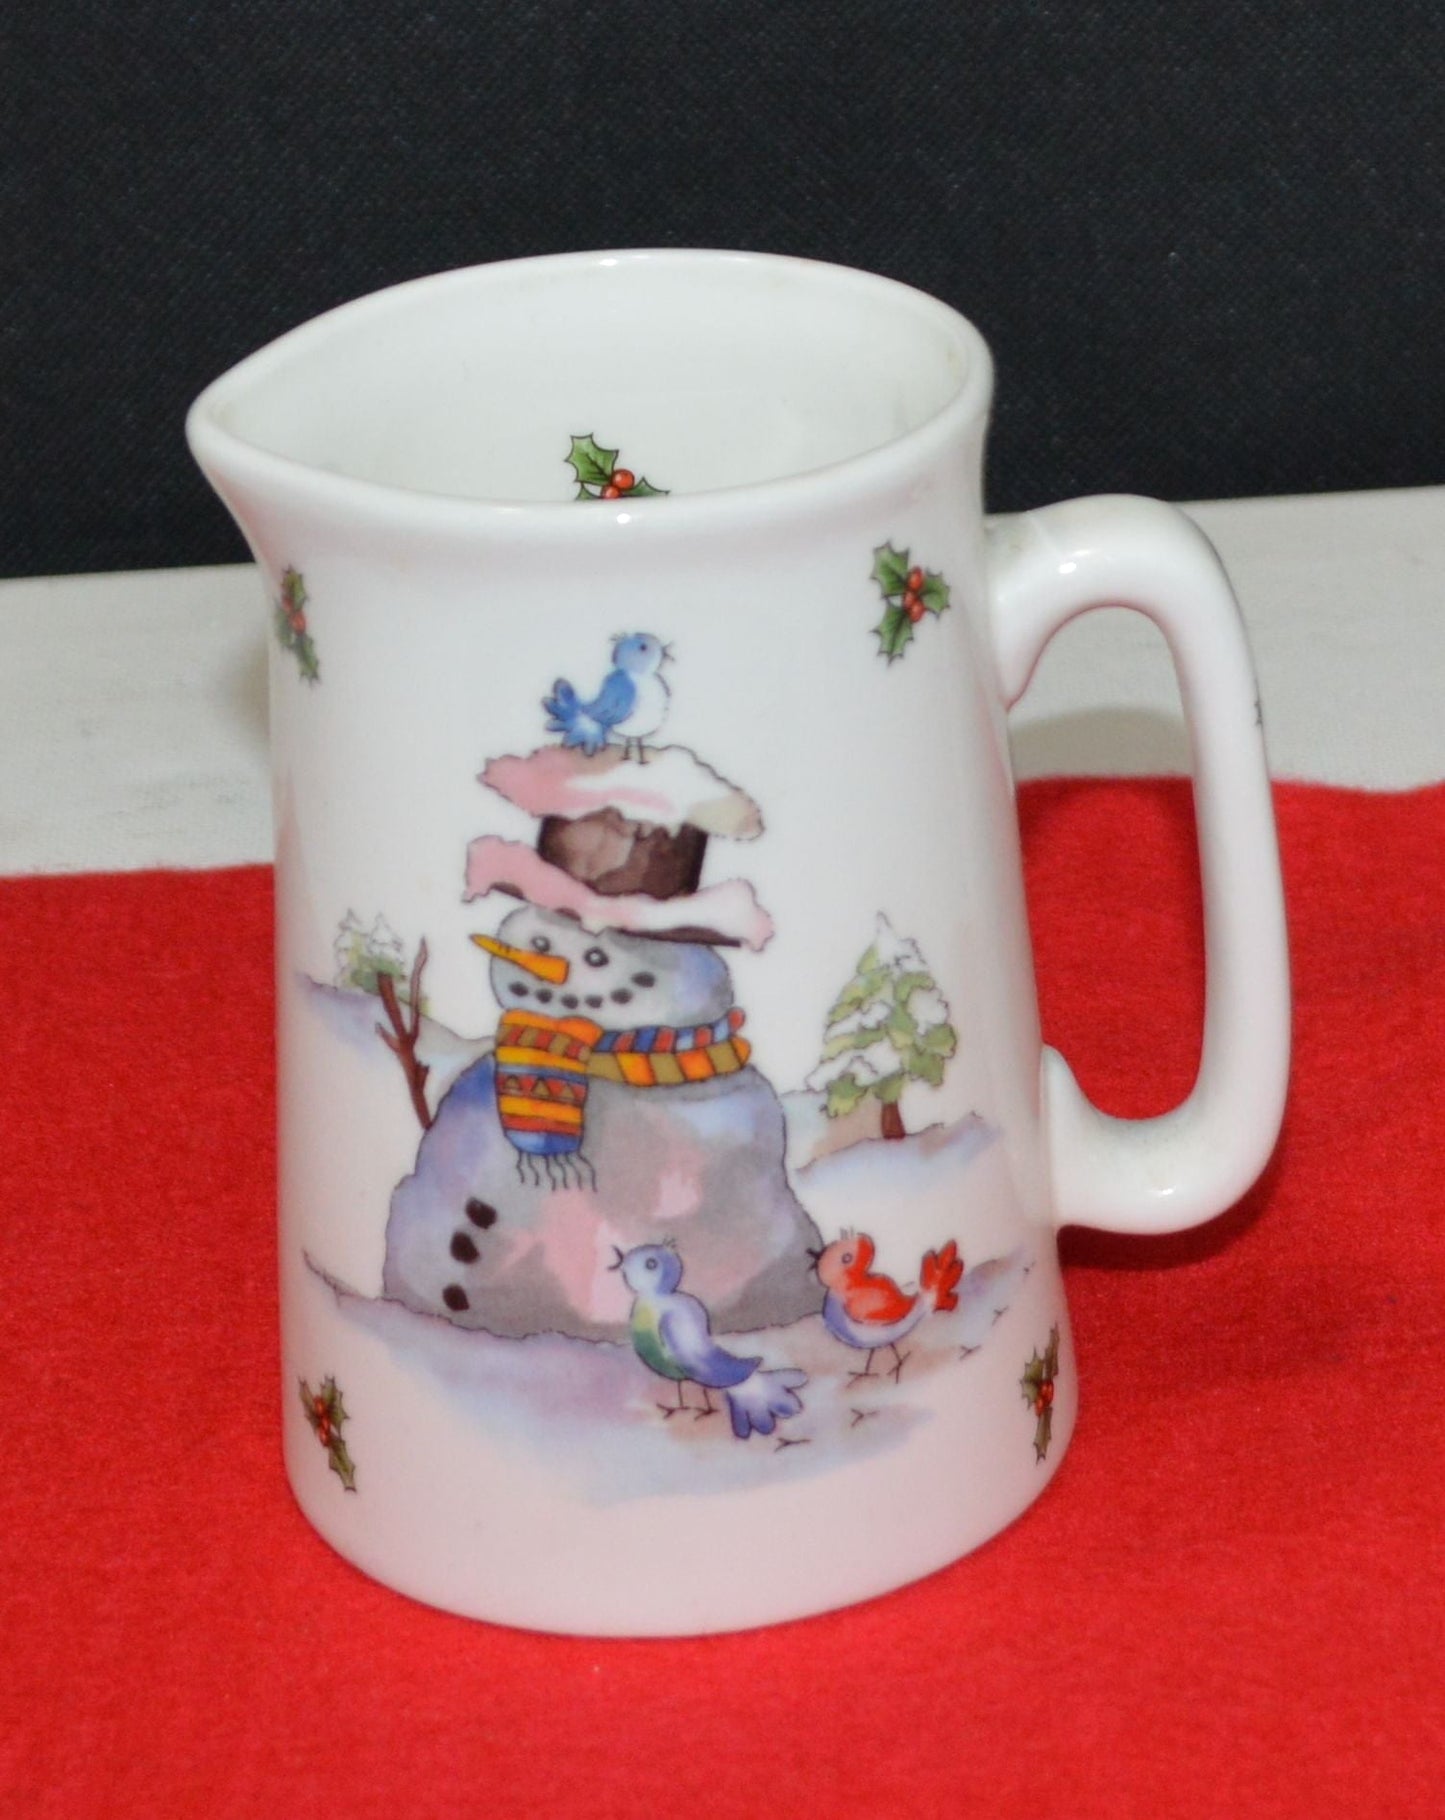 TABLEWARE JAMES DEAN POTTERY CHRISTMAS JUG DEPICTING A SNOWMAN AND HOLLY(PREVIOUSLY OWNED) VERY GOOD CONDITION - TMD167207